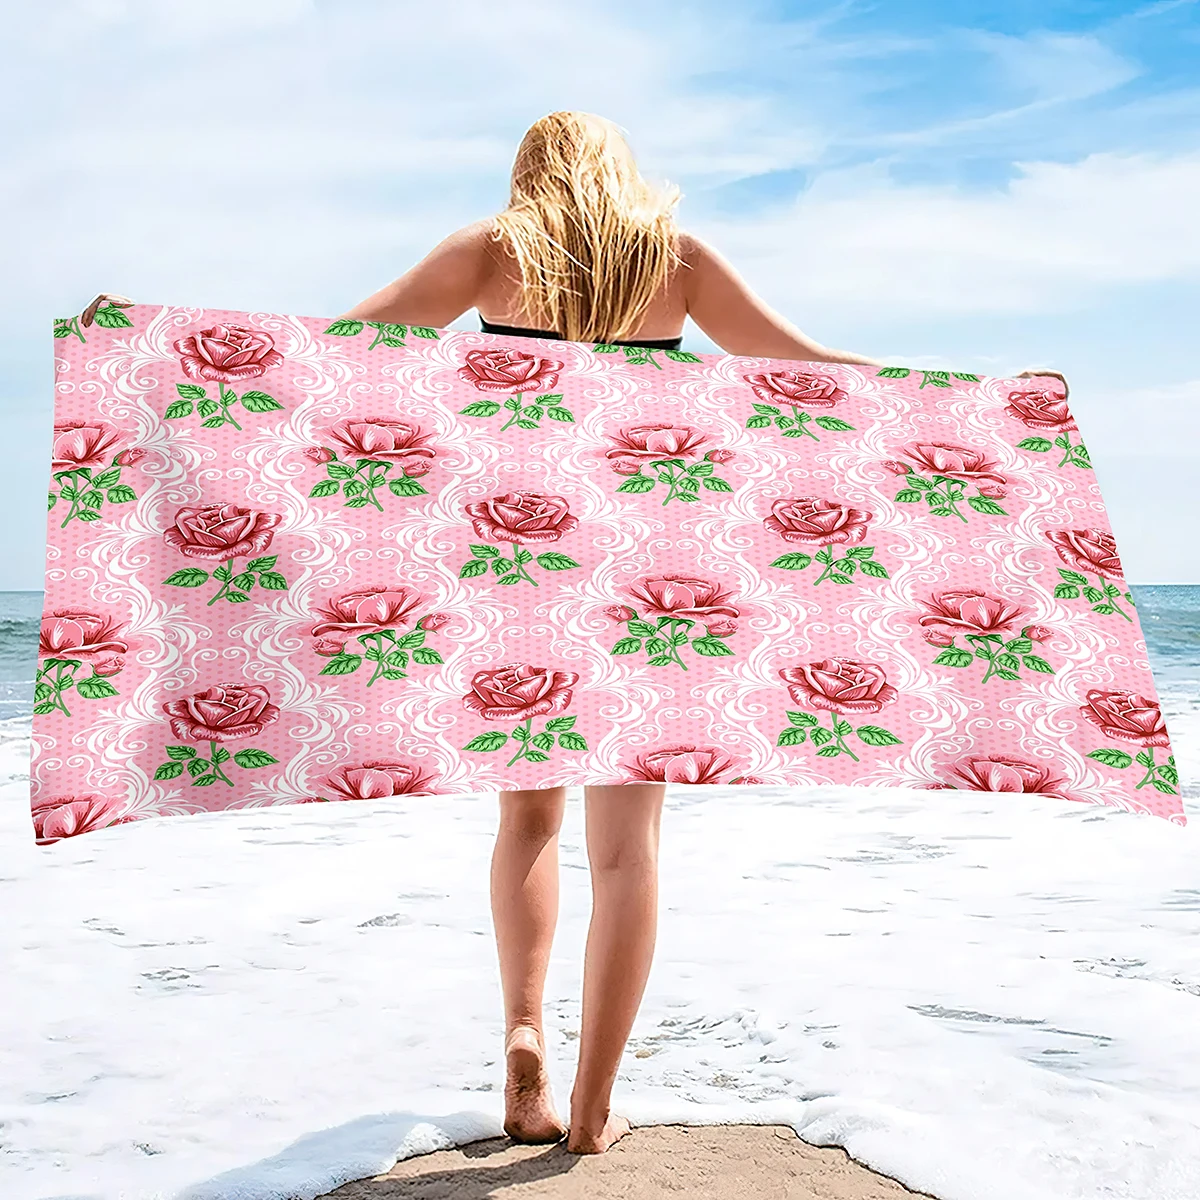 

Roses Blossom Beach Towel Quick Dry Towel Sand Free Sandproof Beach Towel Microfiber Beach Towels for Pool Travel Swimming